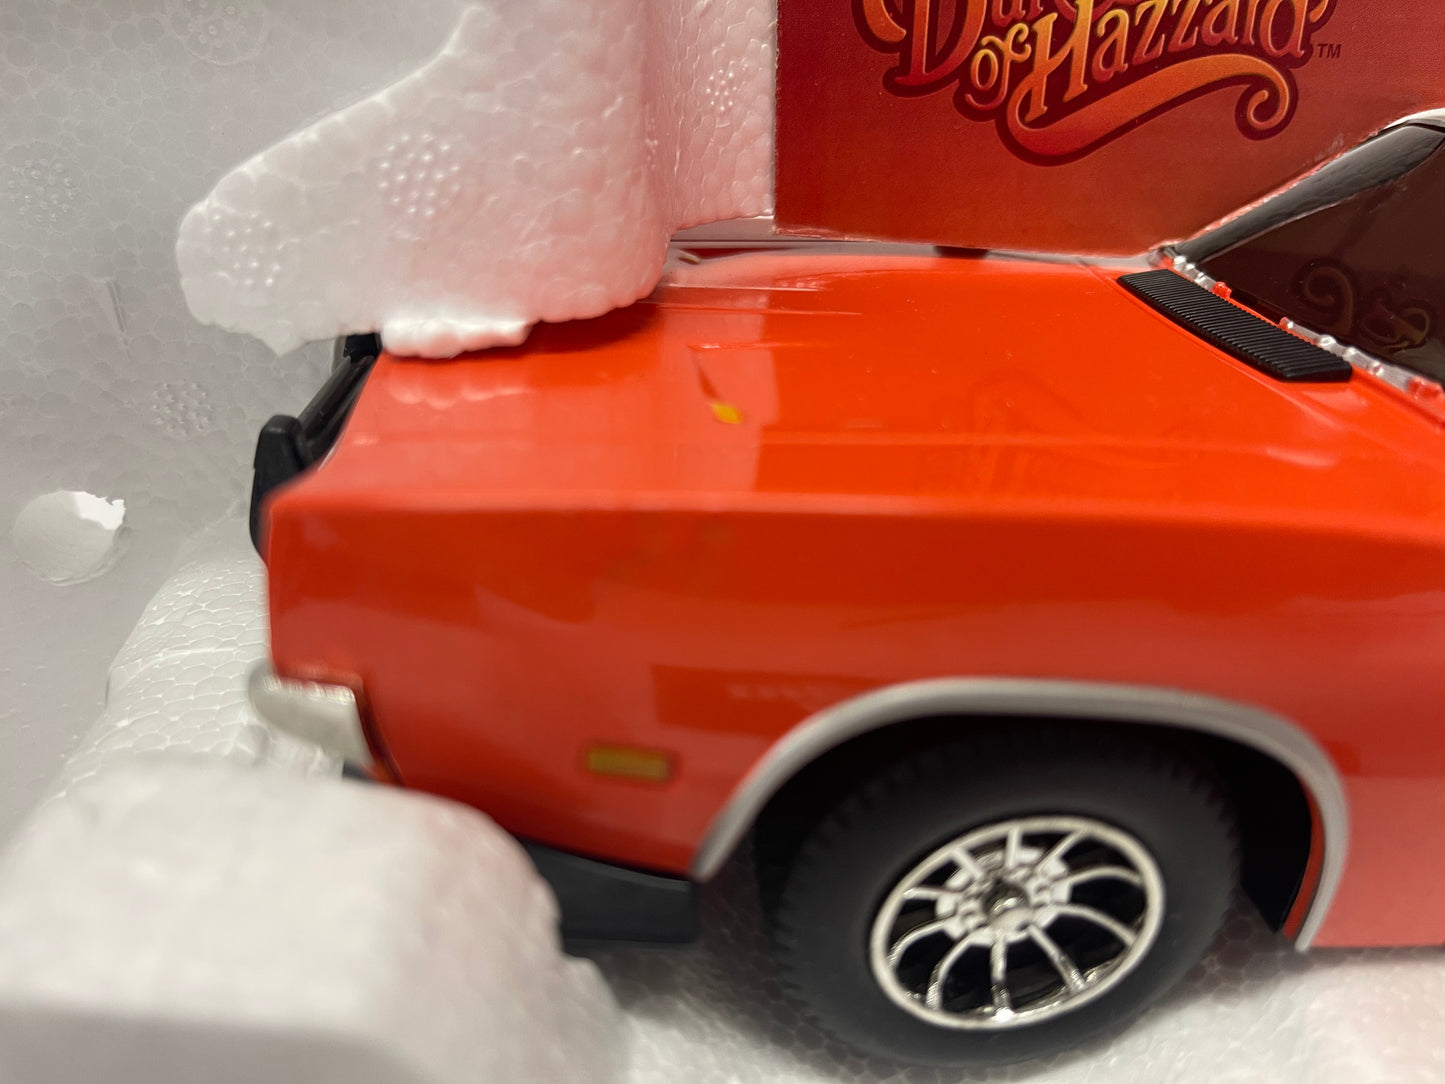 Dukes of Hazzard General Lee 1969 Dodge Charger RC 1:18